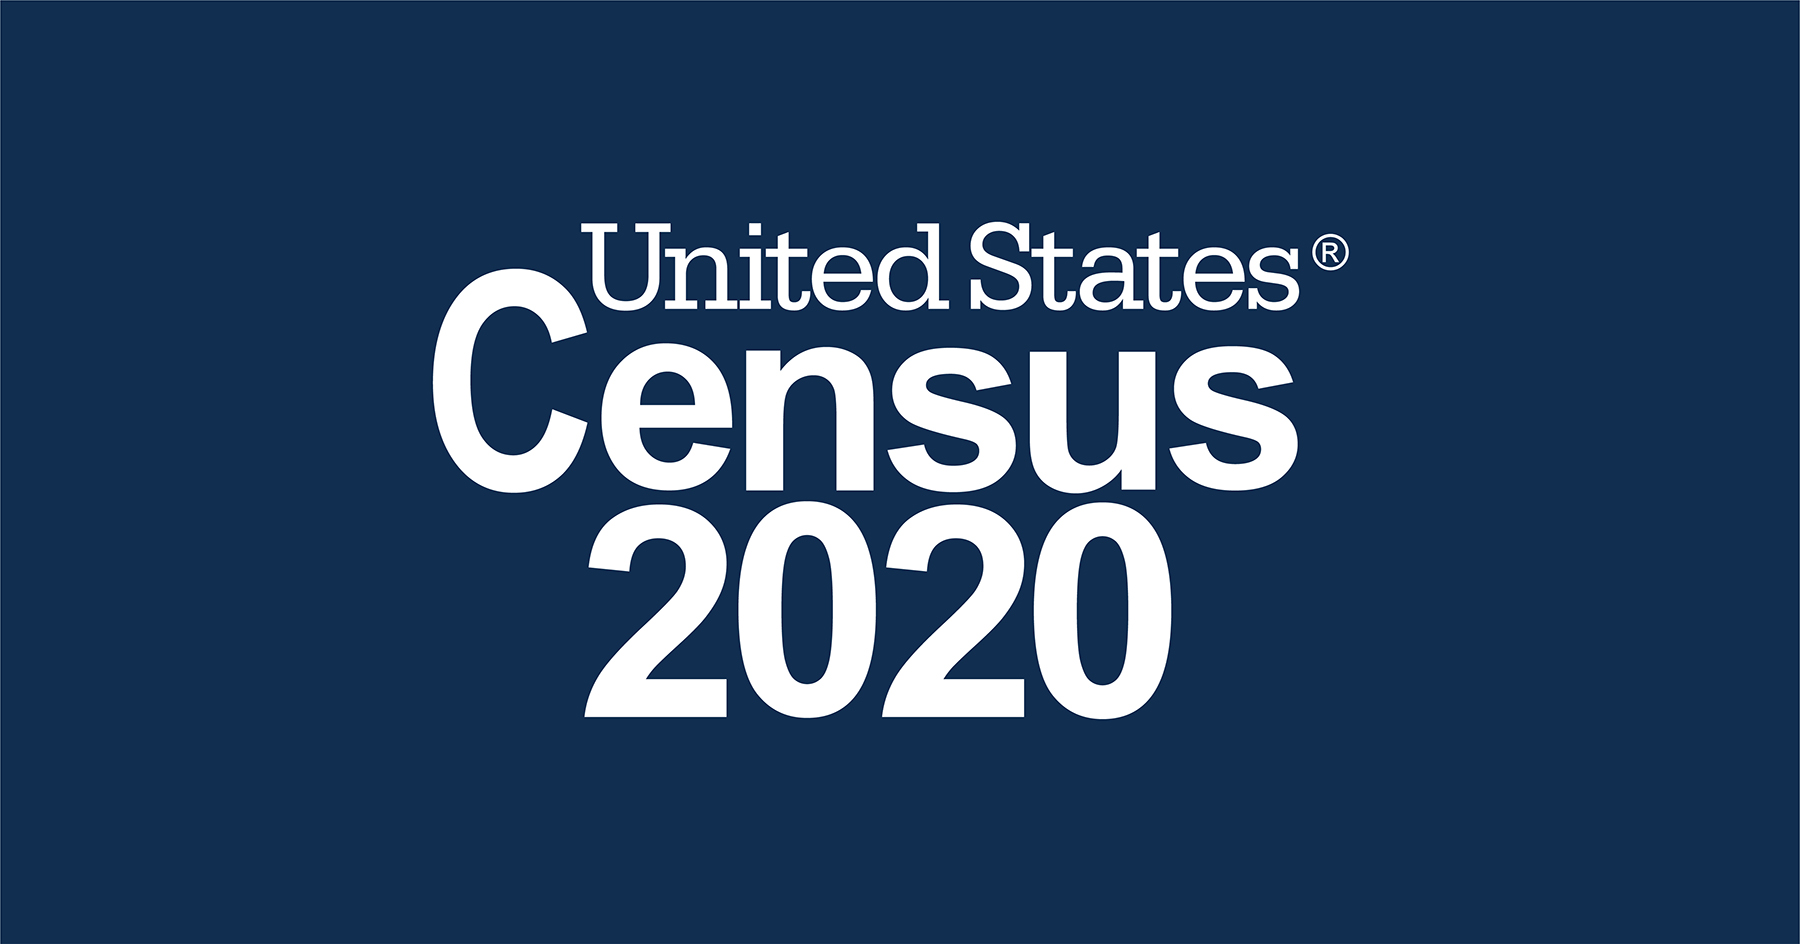 Have a Say in the Future, Participate in the 2020 Census